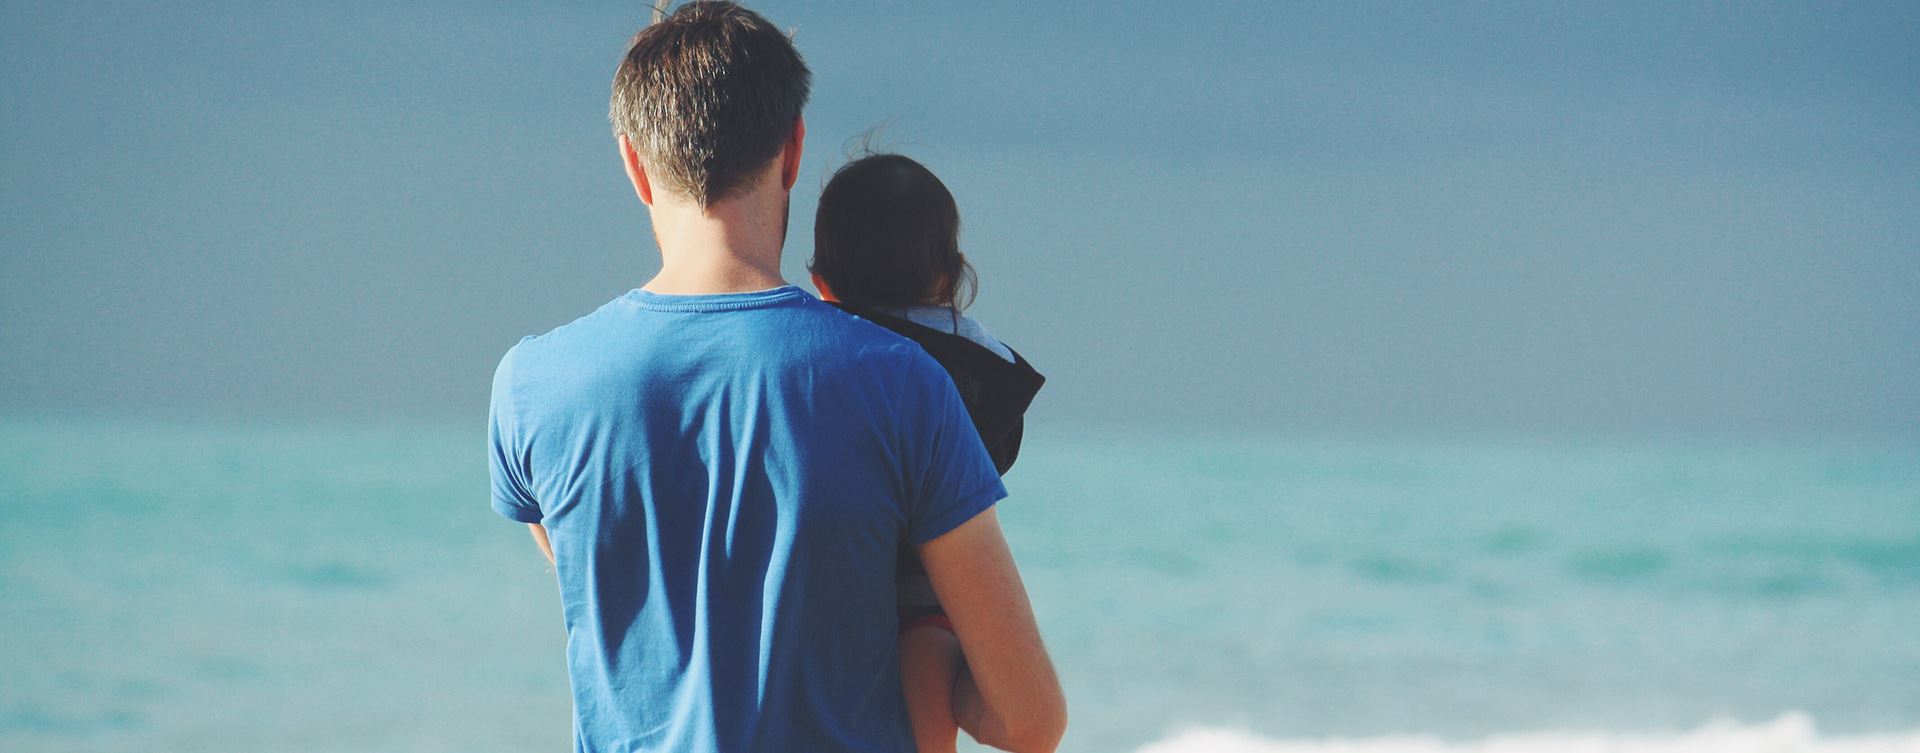 Dad holding young child on a beach facing away towards the sea